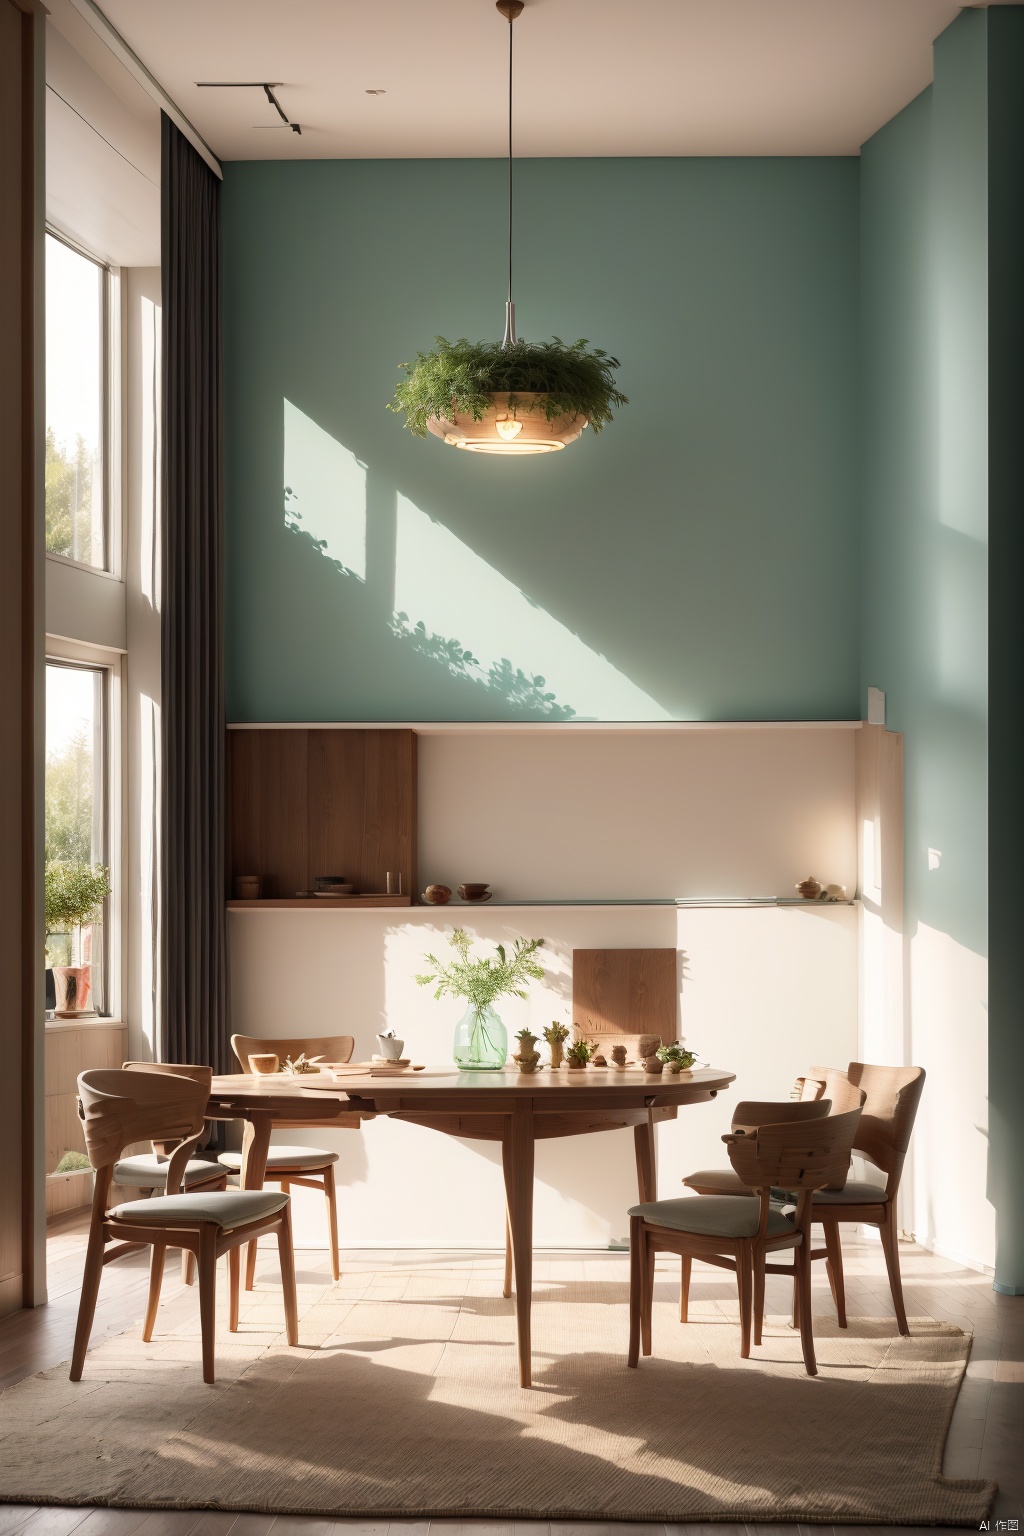 AgainRealistic_v2.0, no humans, scenery, table, chair, indoors, window, shadow, plant, ceiling light, lamp, bug, sunlight, tree, vase, potted plant, curtains, day, flower pot, hanging light, light, shade, butterfly, AgainRealistic_v2.0